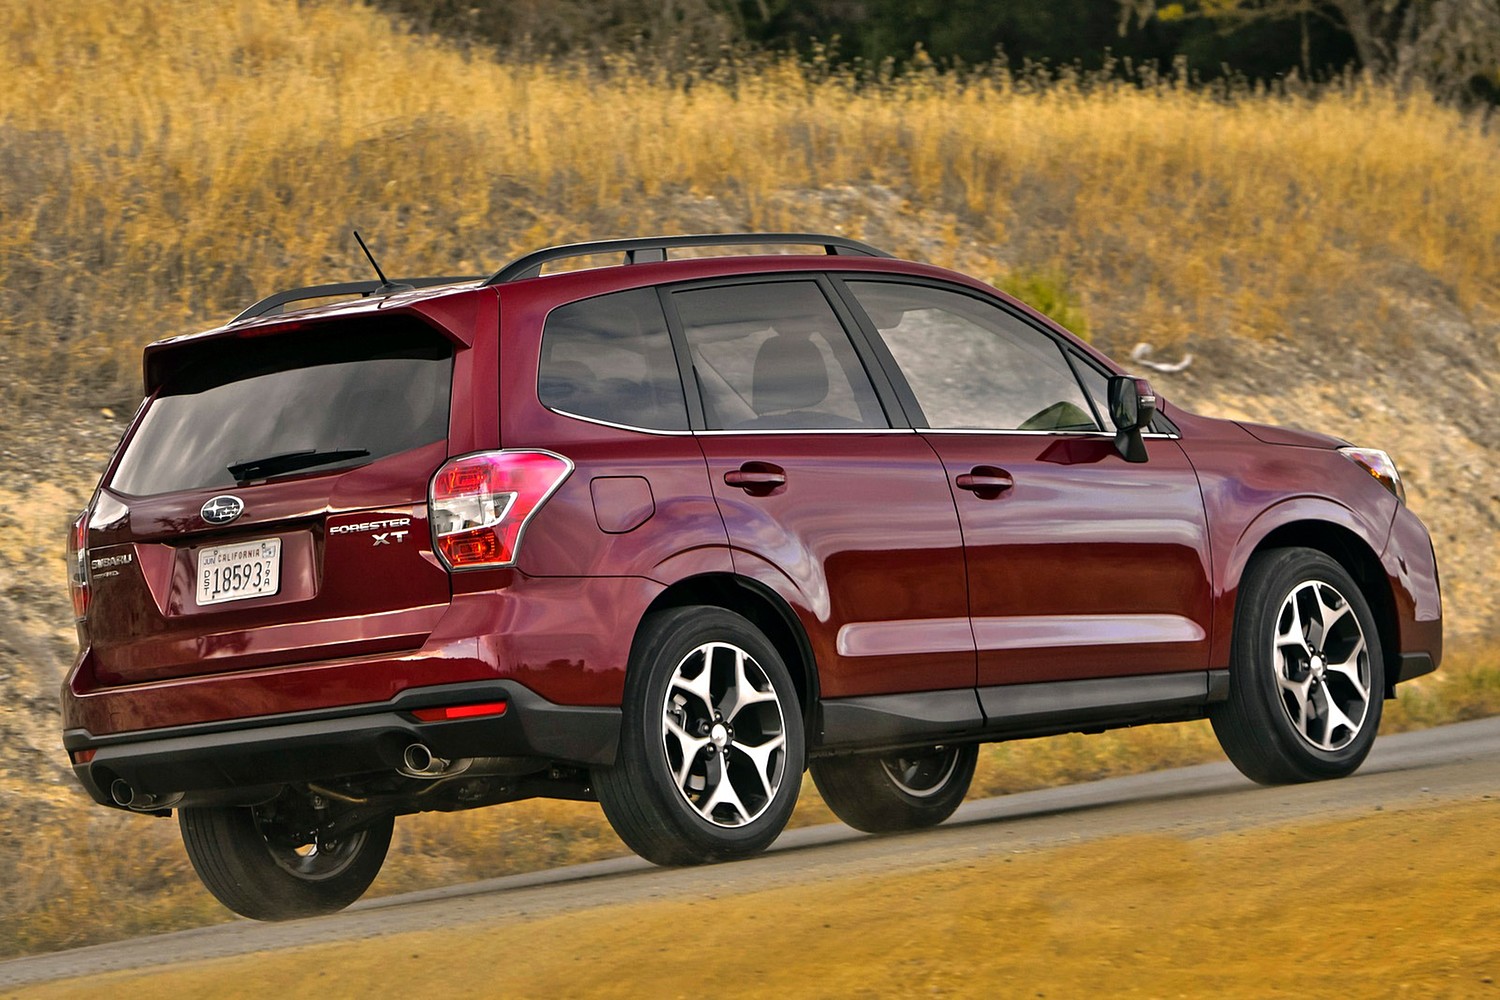 Subaru Forester 2.0XT Touring 4dr SUV Exterior Shown (2015 model year shown)